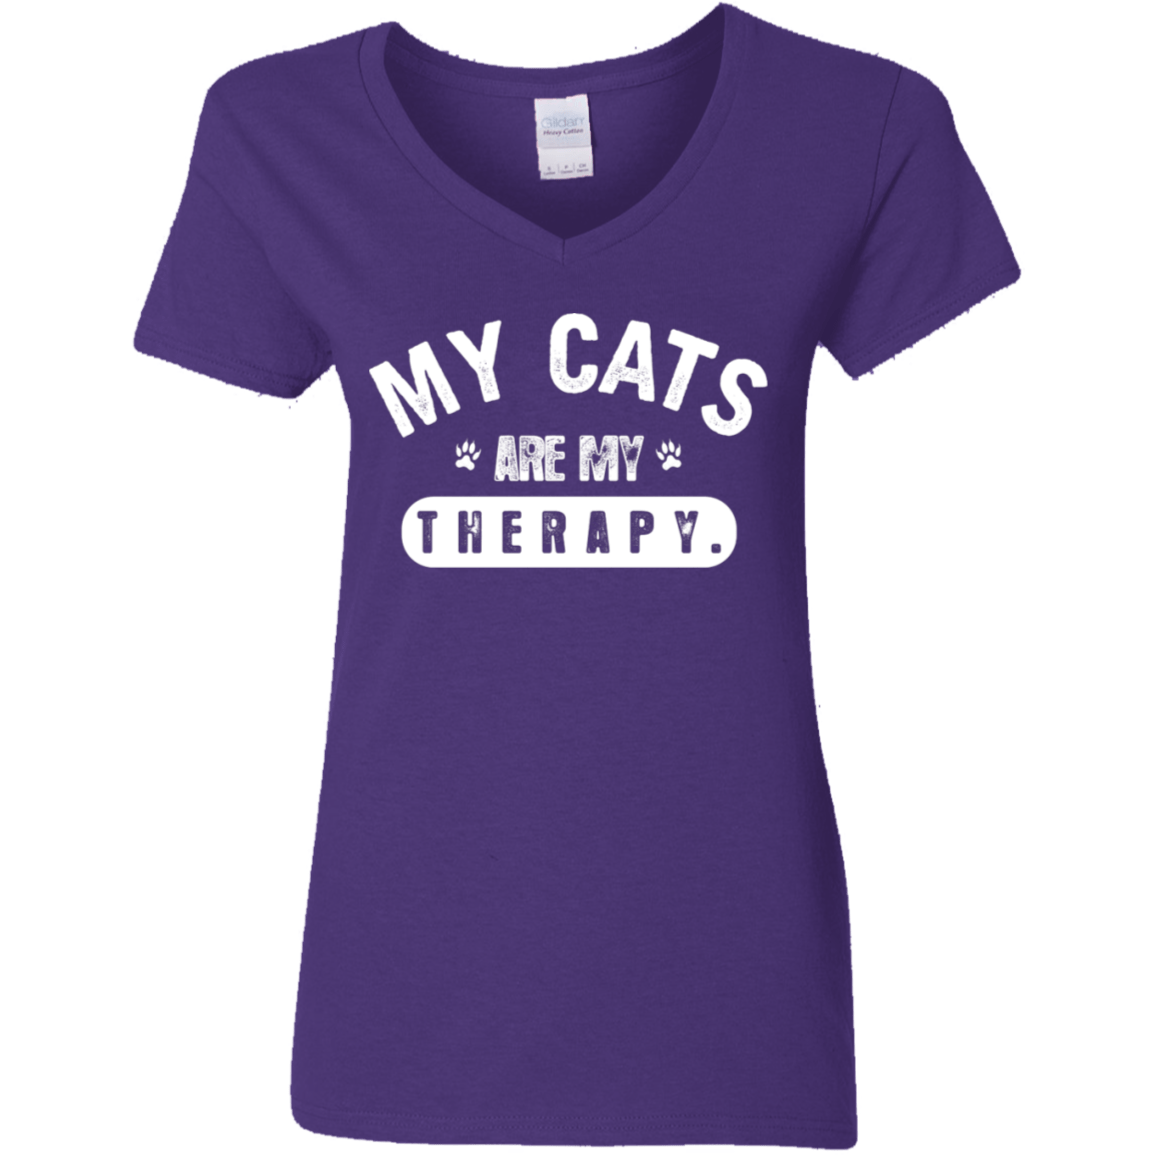 My Cats Are My Therapy - Ladies V Neck.